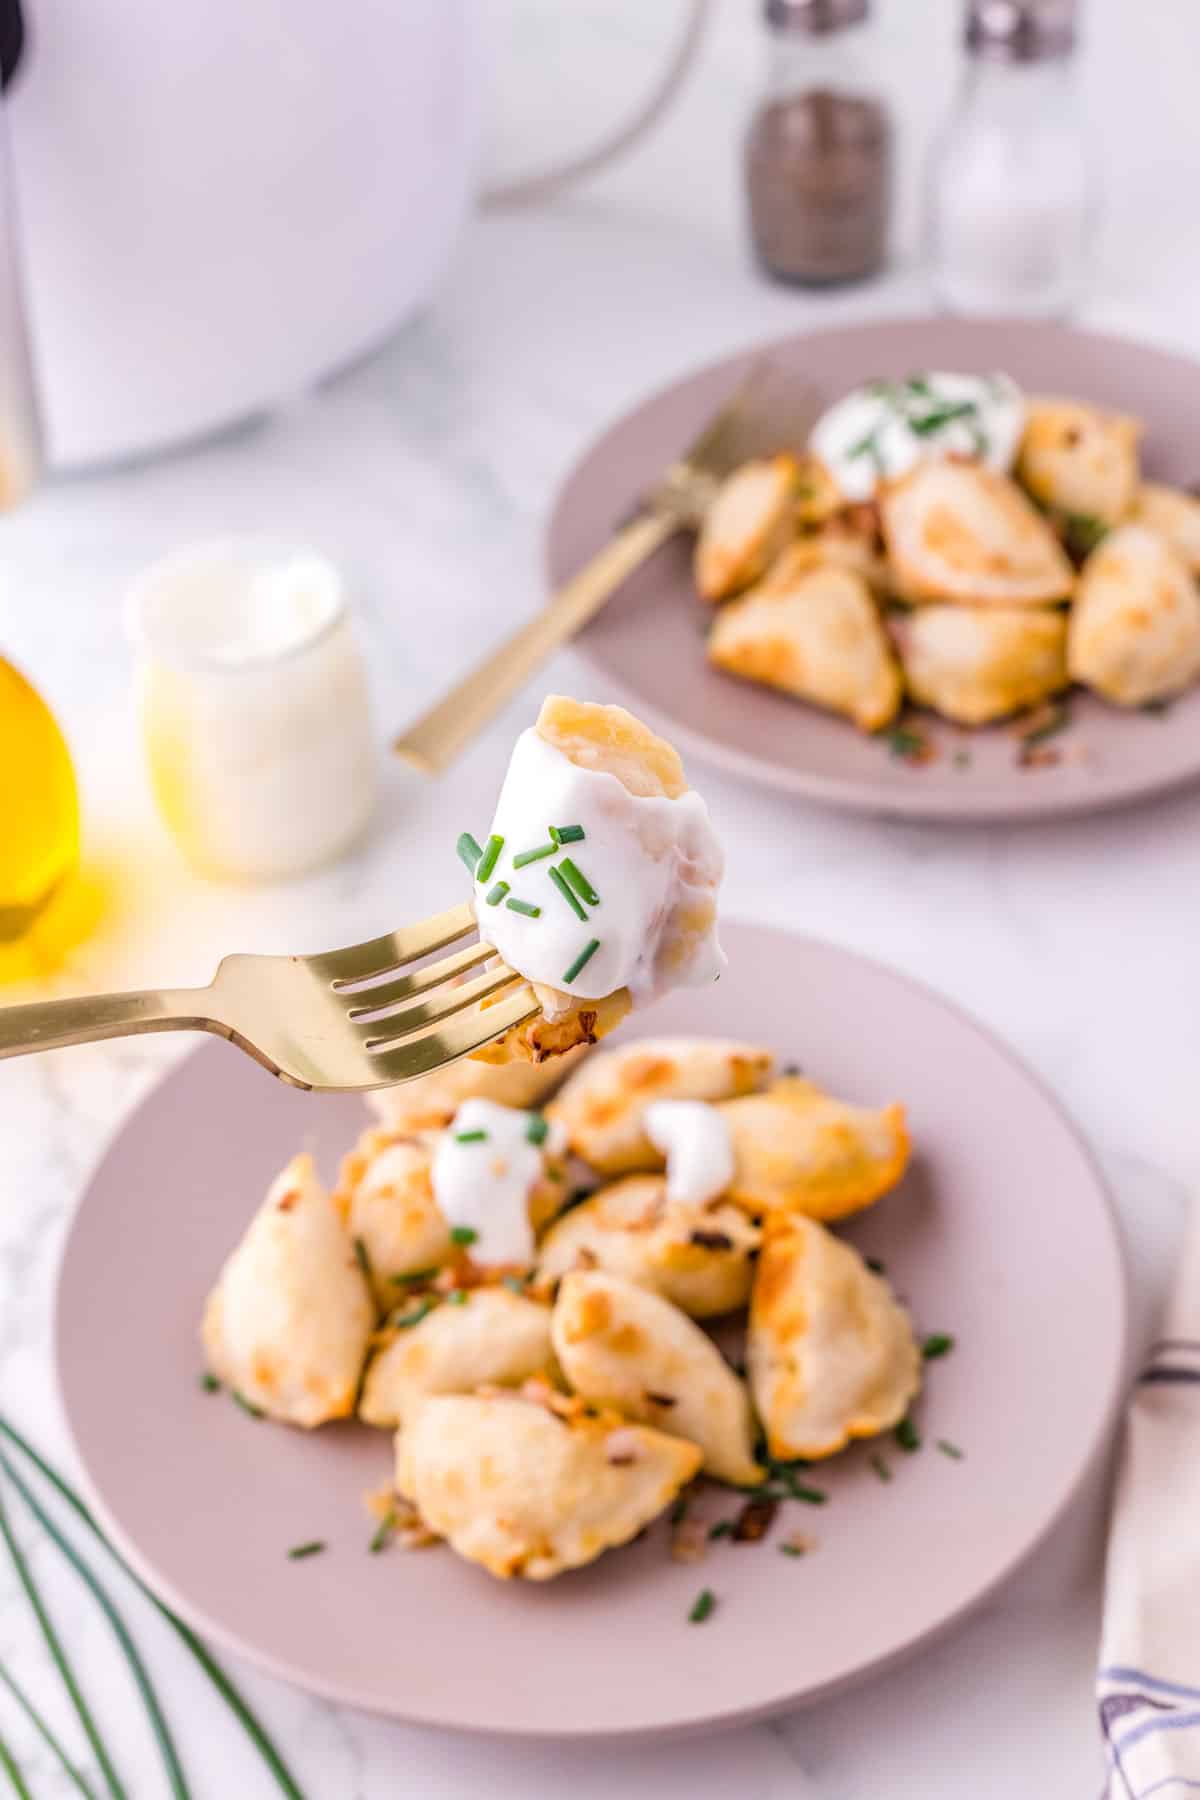 A fork picking up a pierogi with some sour cream on it.